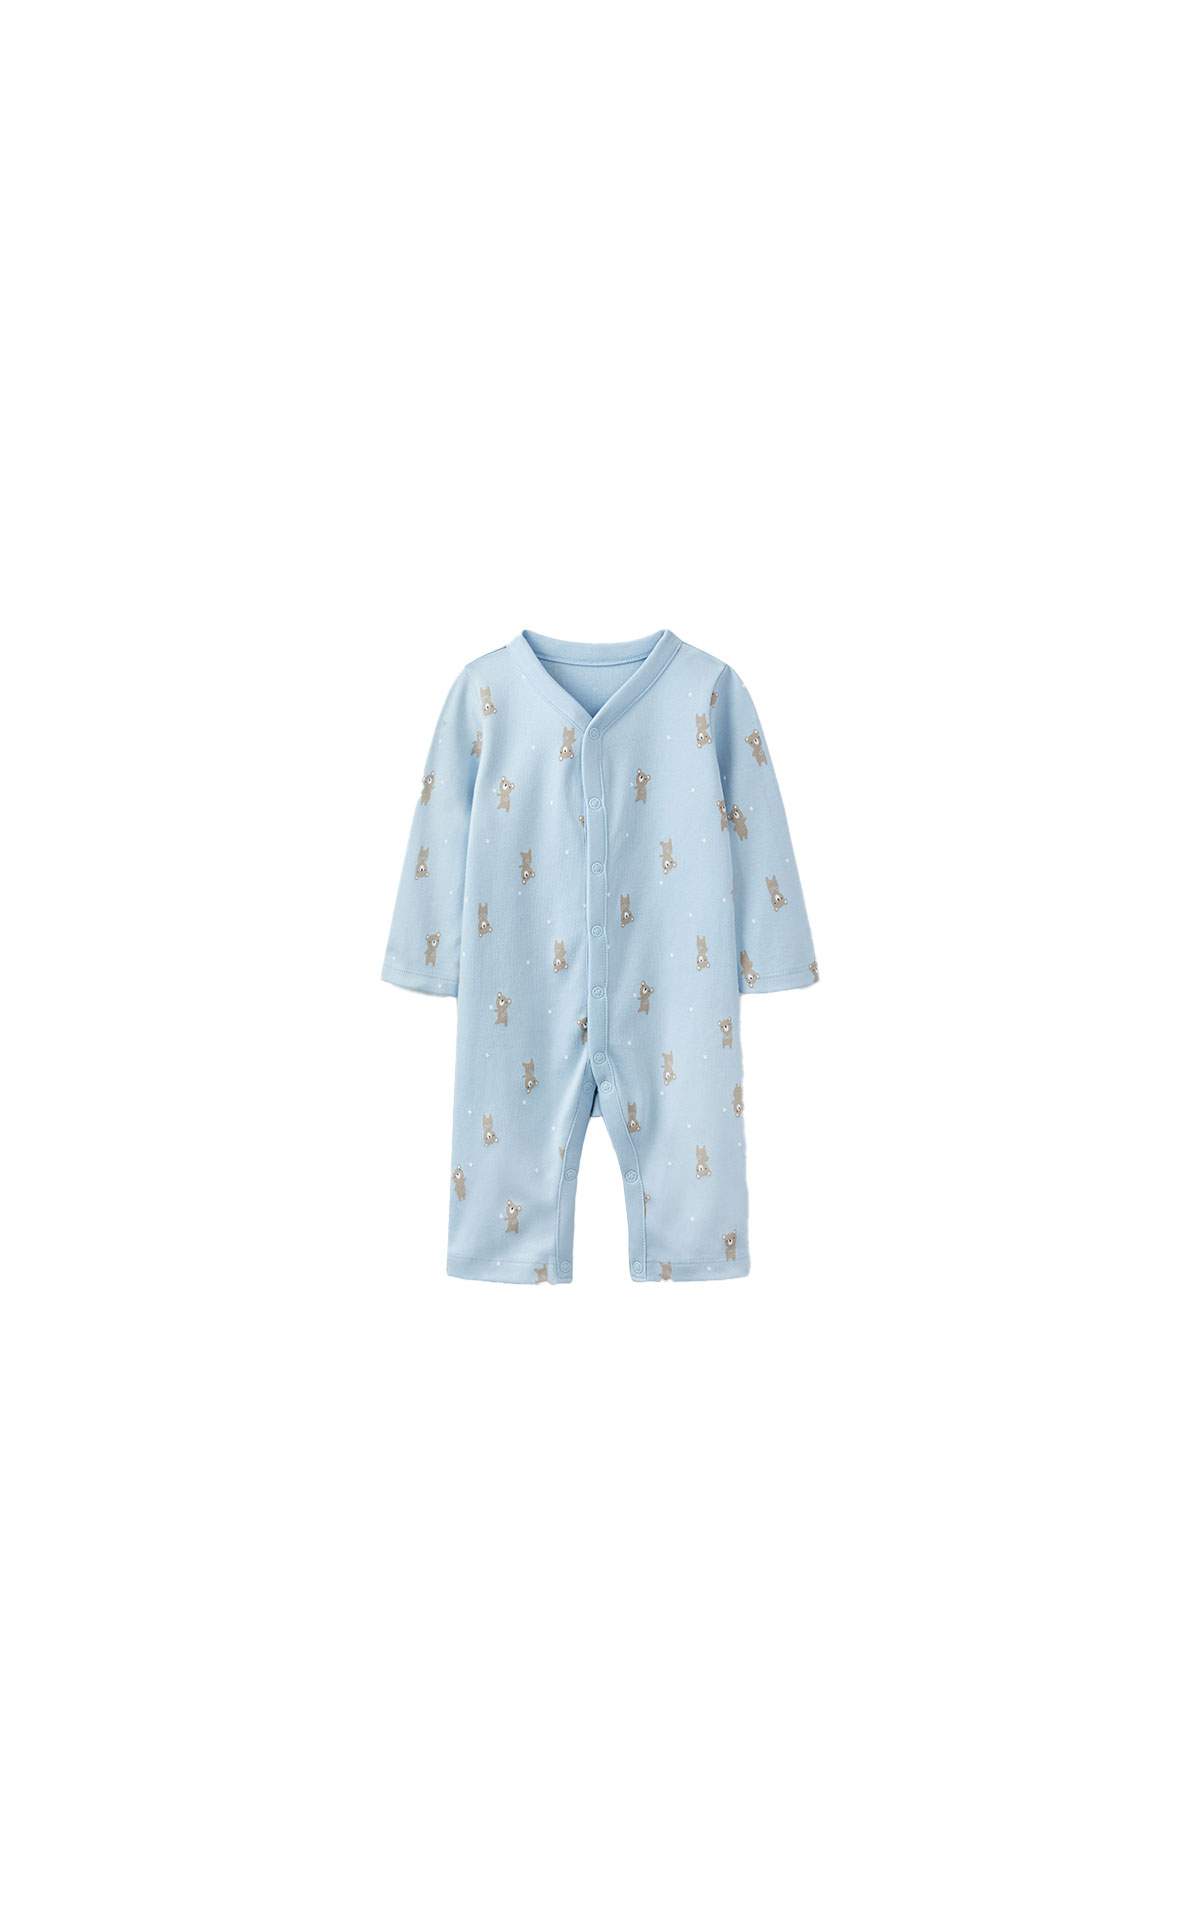 The White Company Starlight bear sleepsuit from Bicester Village